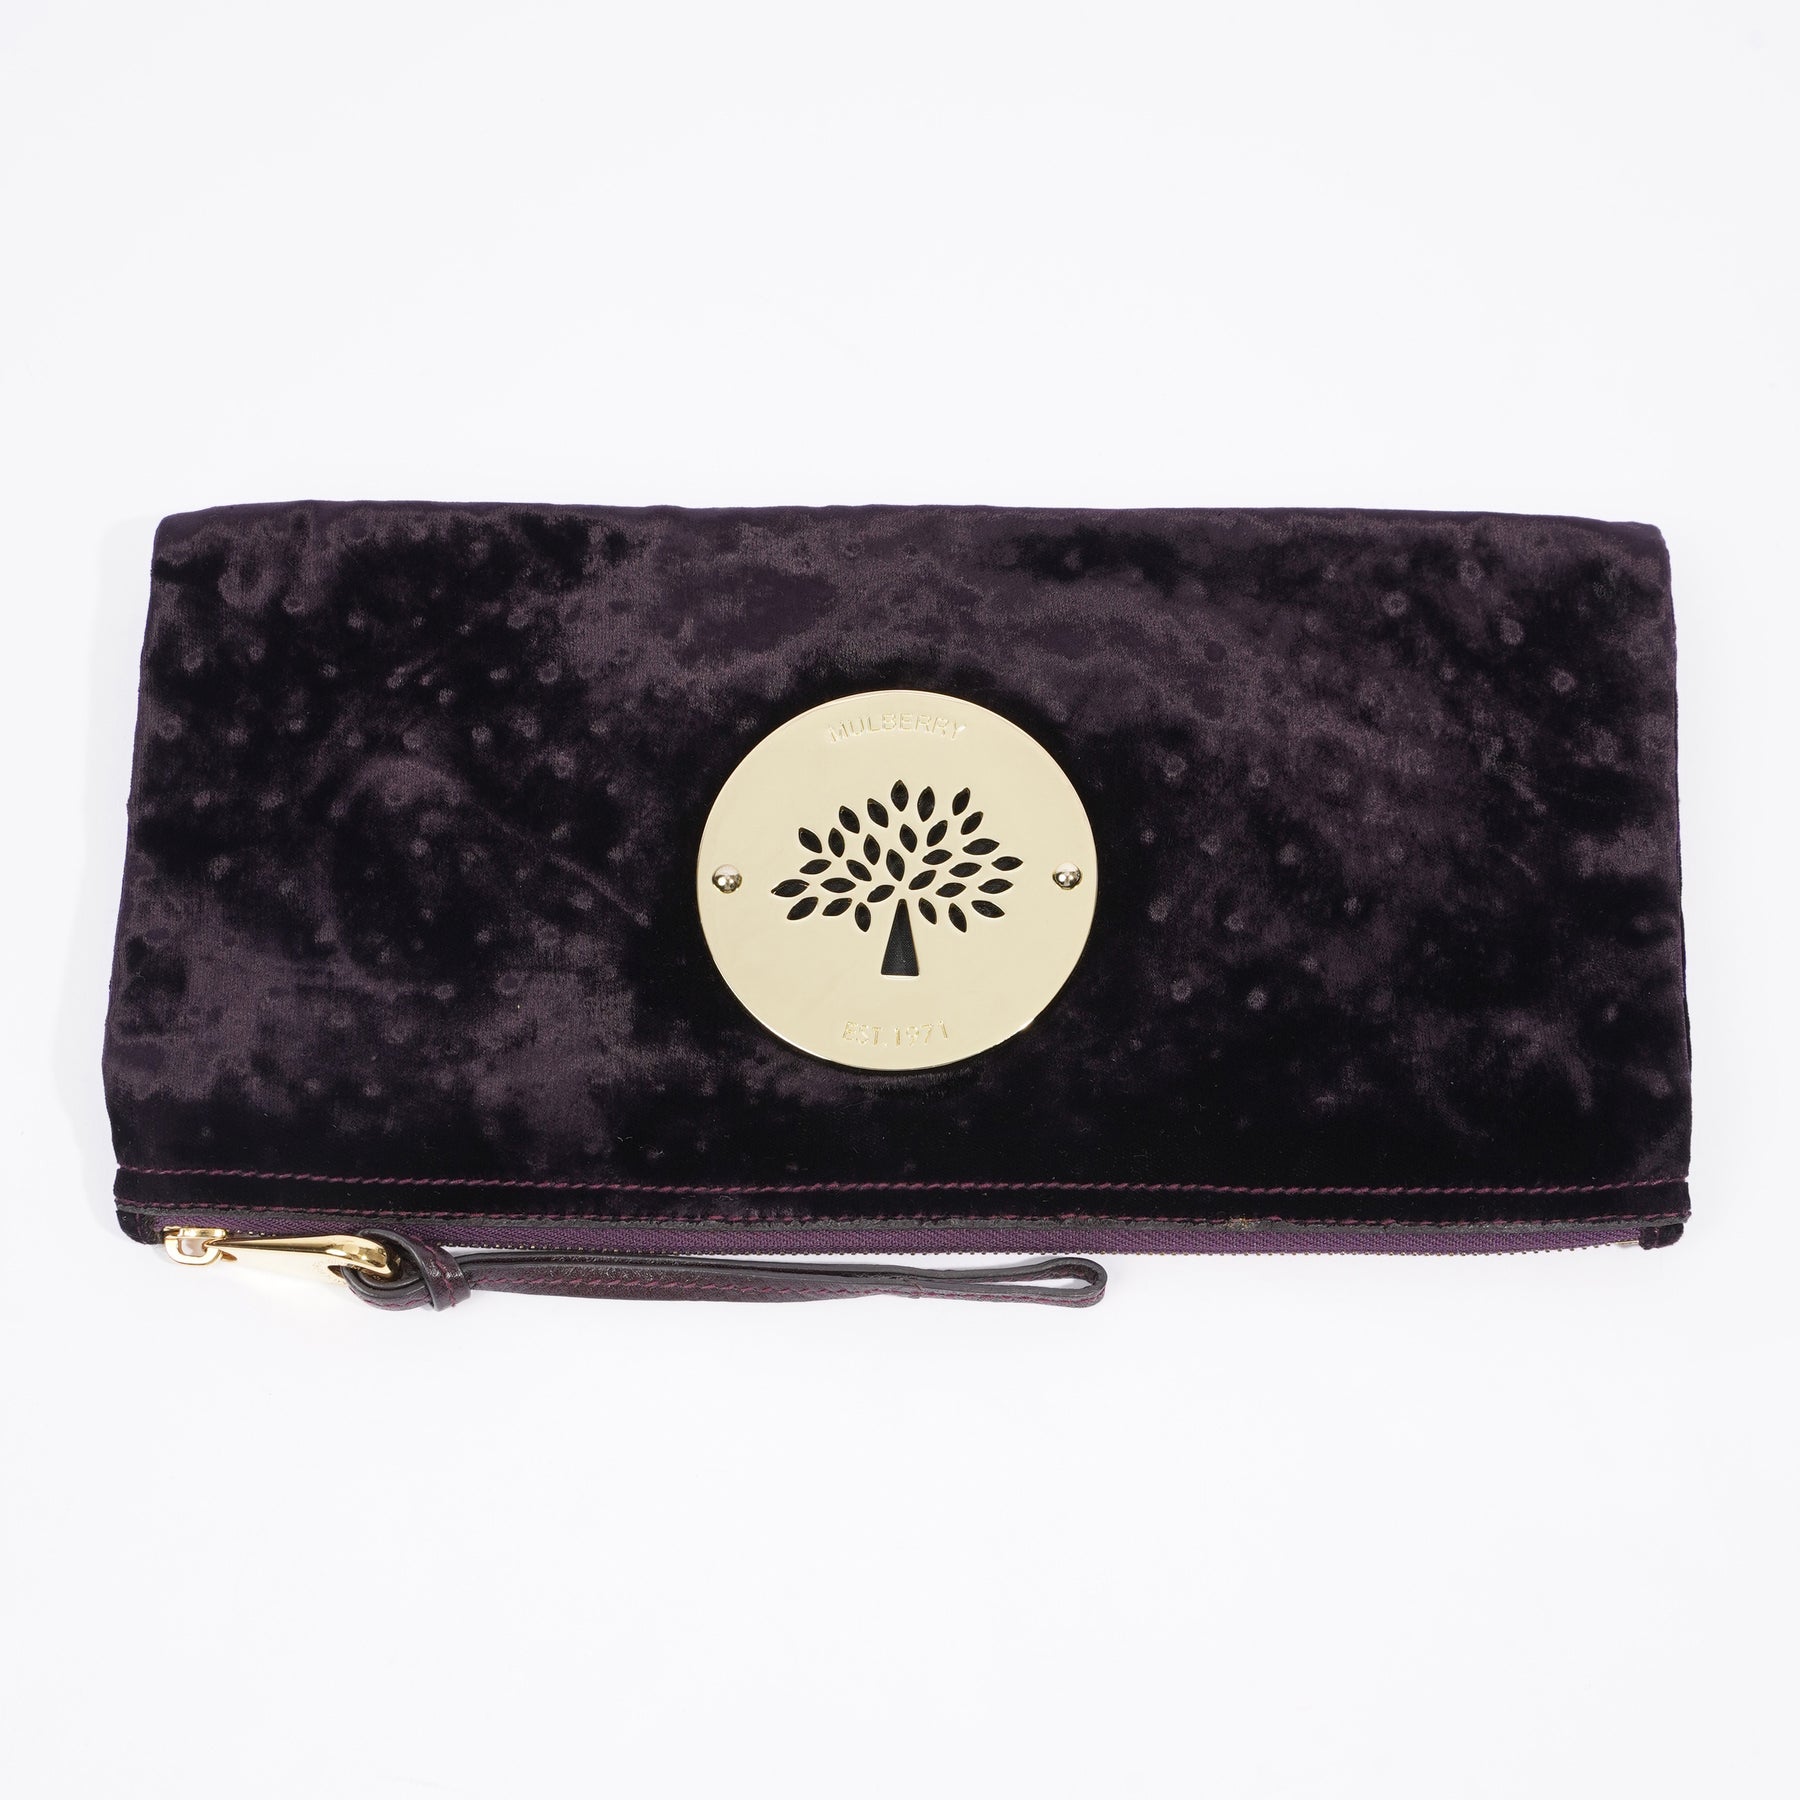 What Every Girl Needs #5: Mulberry Daria French Purse | Bragmybag